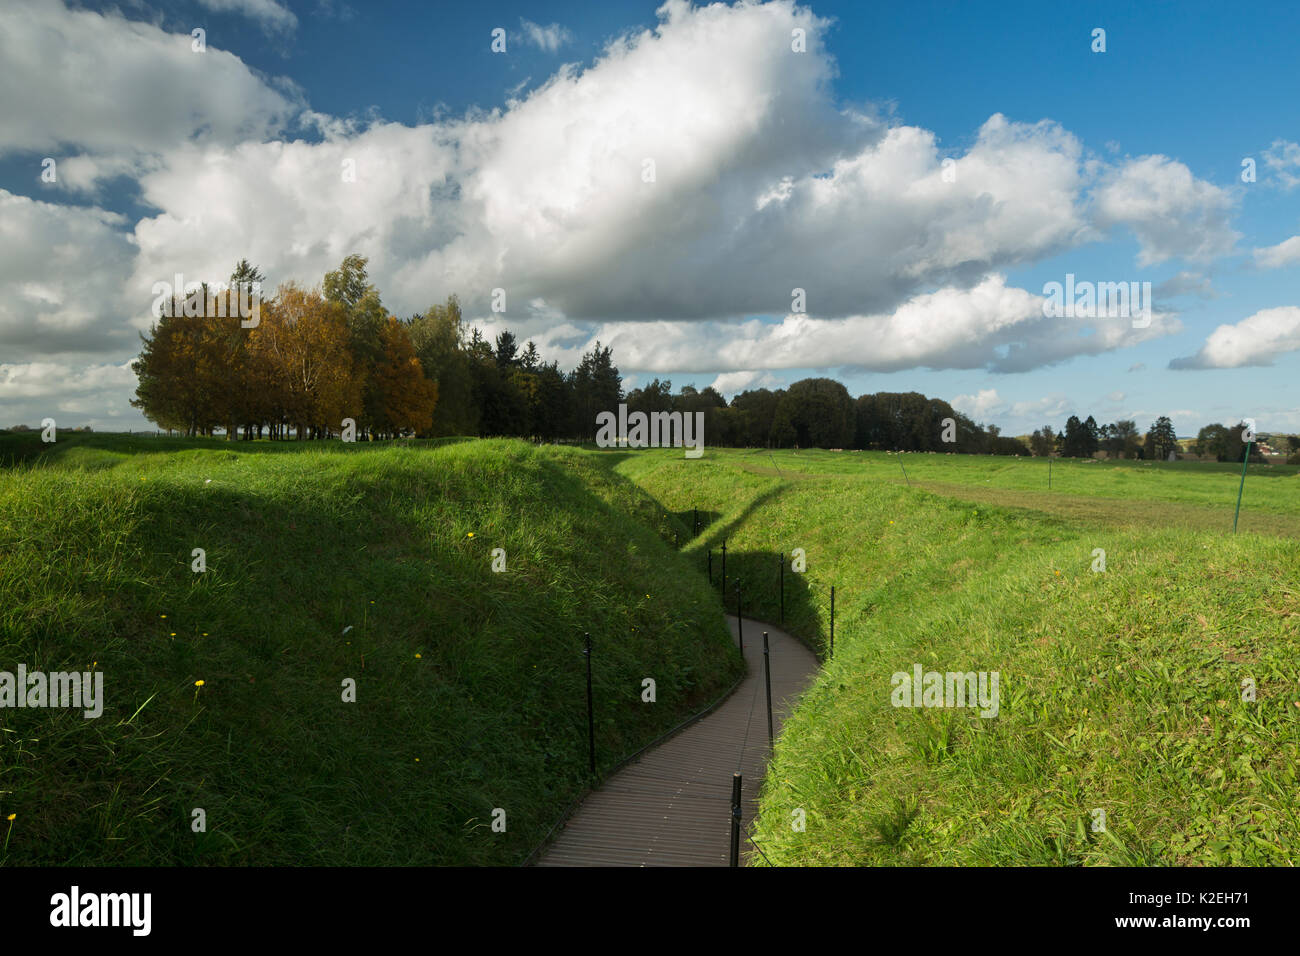 Remains of trenches from the First World War at Newfoundland Memorial Park on the Somme battlefield, Beaumont Hamel, Picardy, France, October 2014. Stock Photo